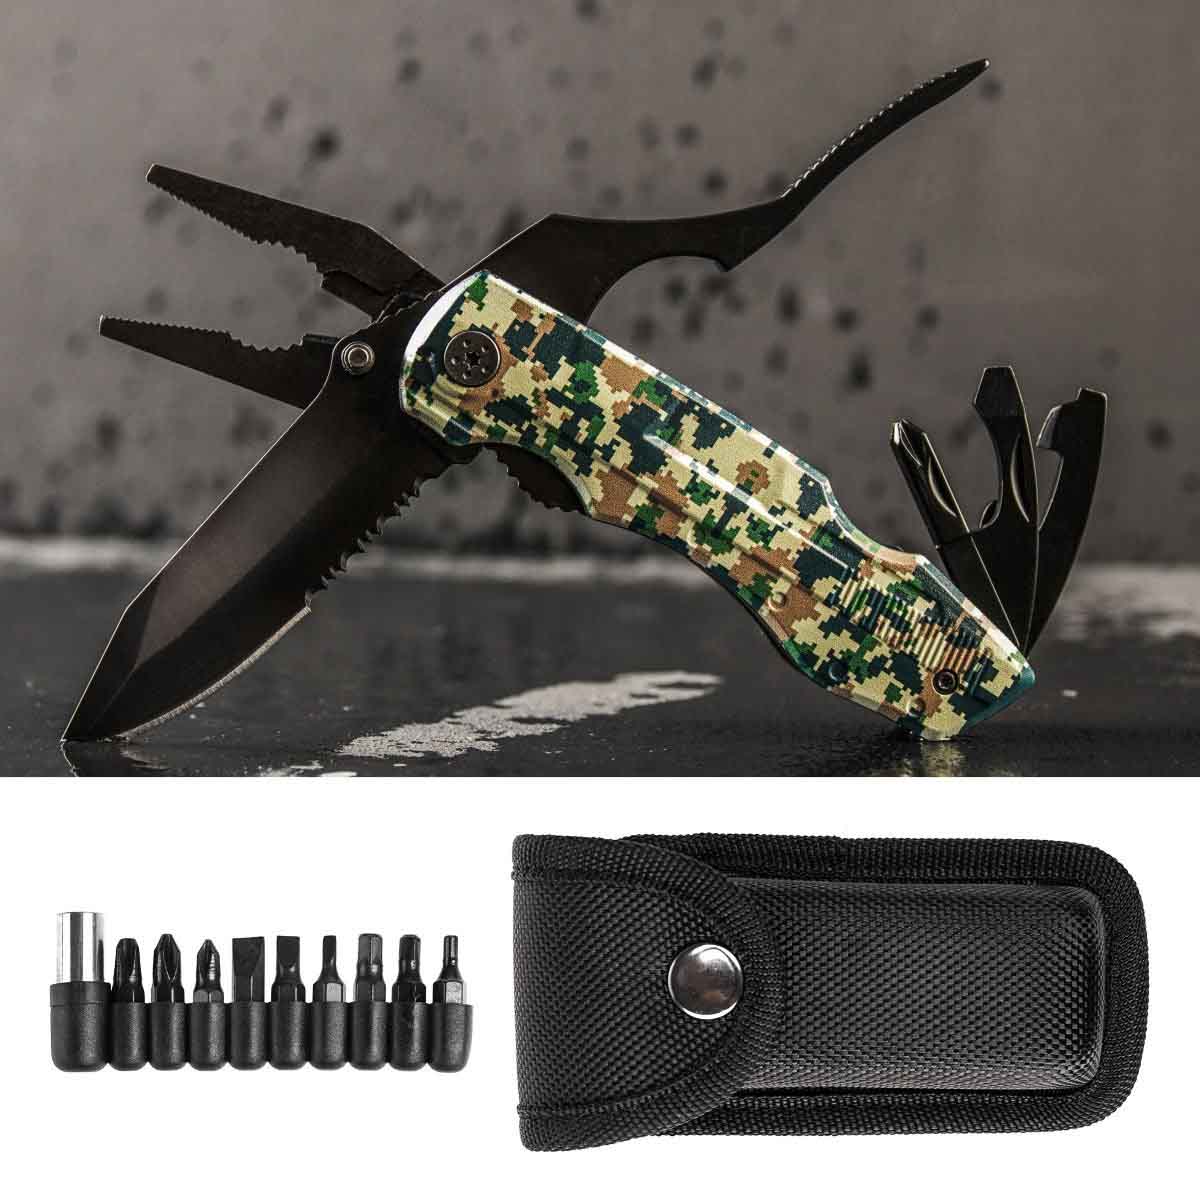 Safety Lock 14-in-1 Survival Multitool for Fishing, Hunting